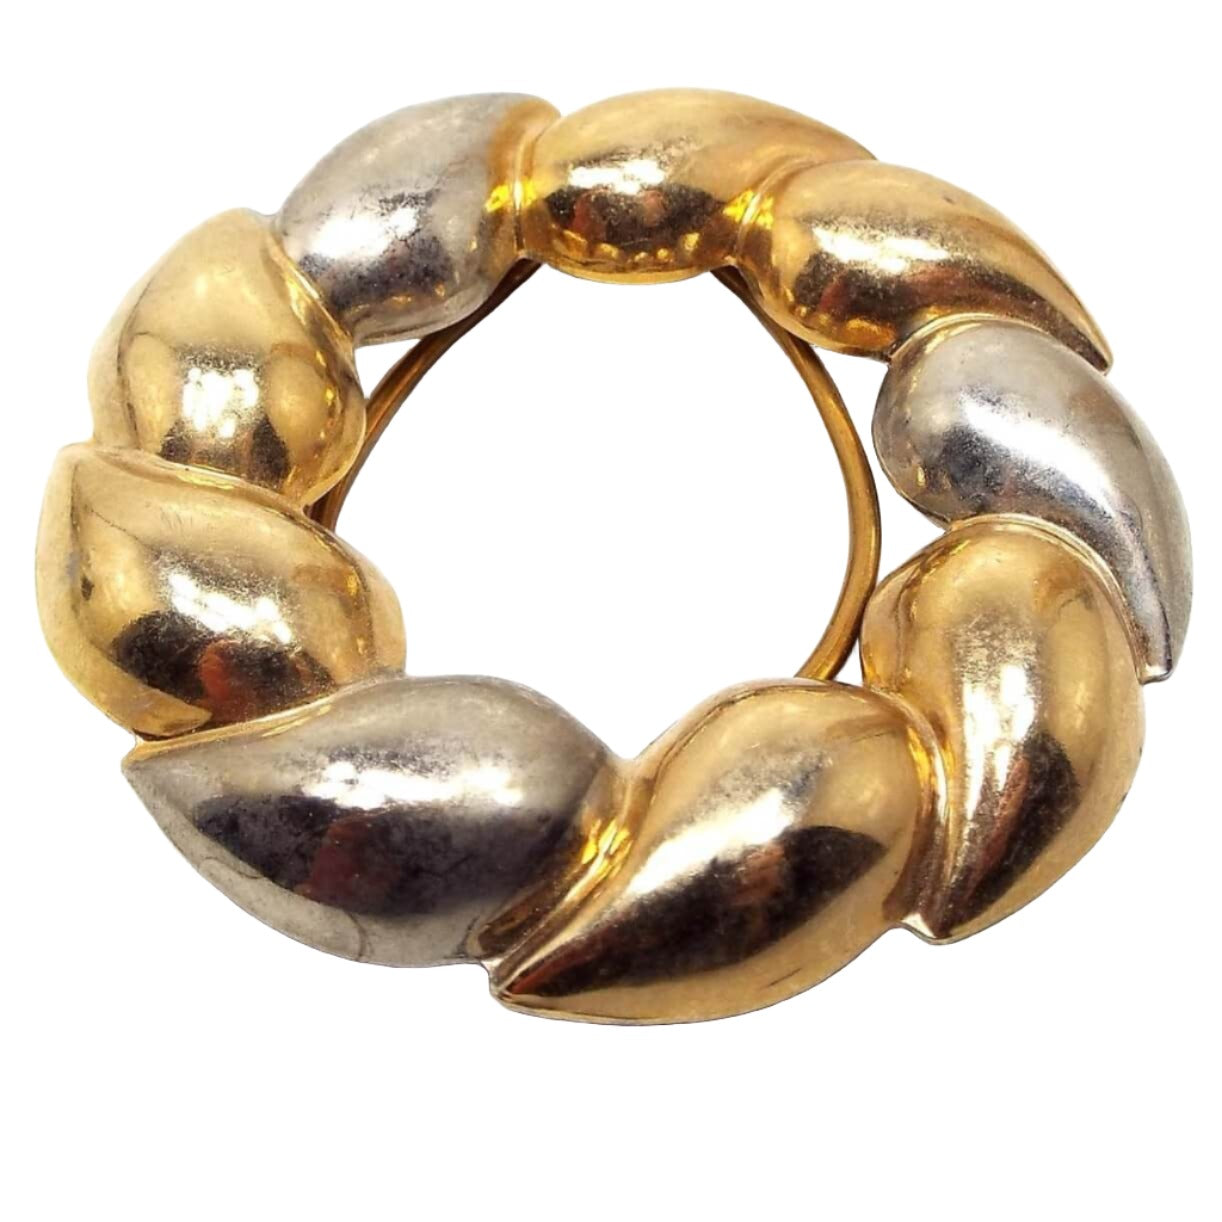 Front view of the retro vintage scarf clip. It has a wreath like design with curved teardrops going around in an open circle. There are two antiqued gold tone teardrops and then an antiqued silver tone one as it goes around the clip.